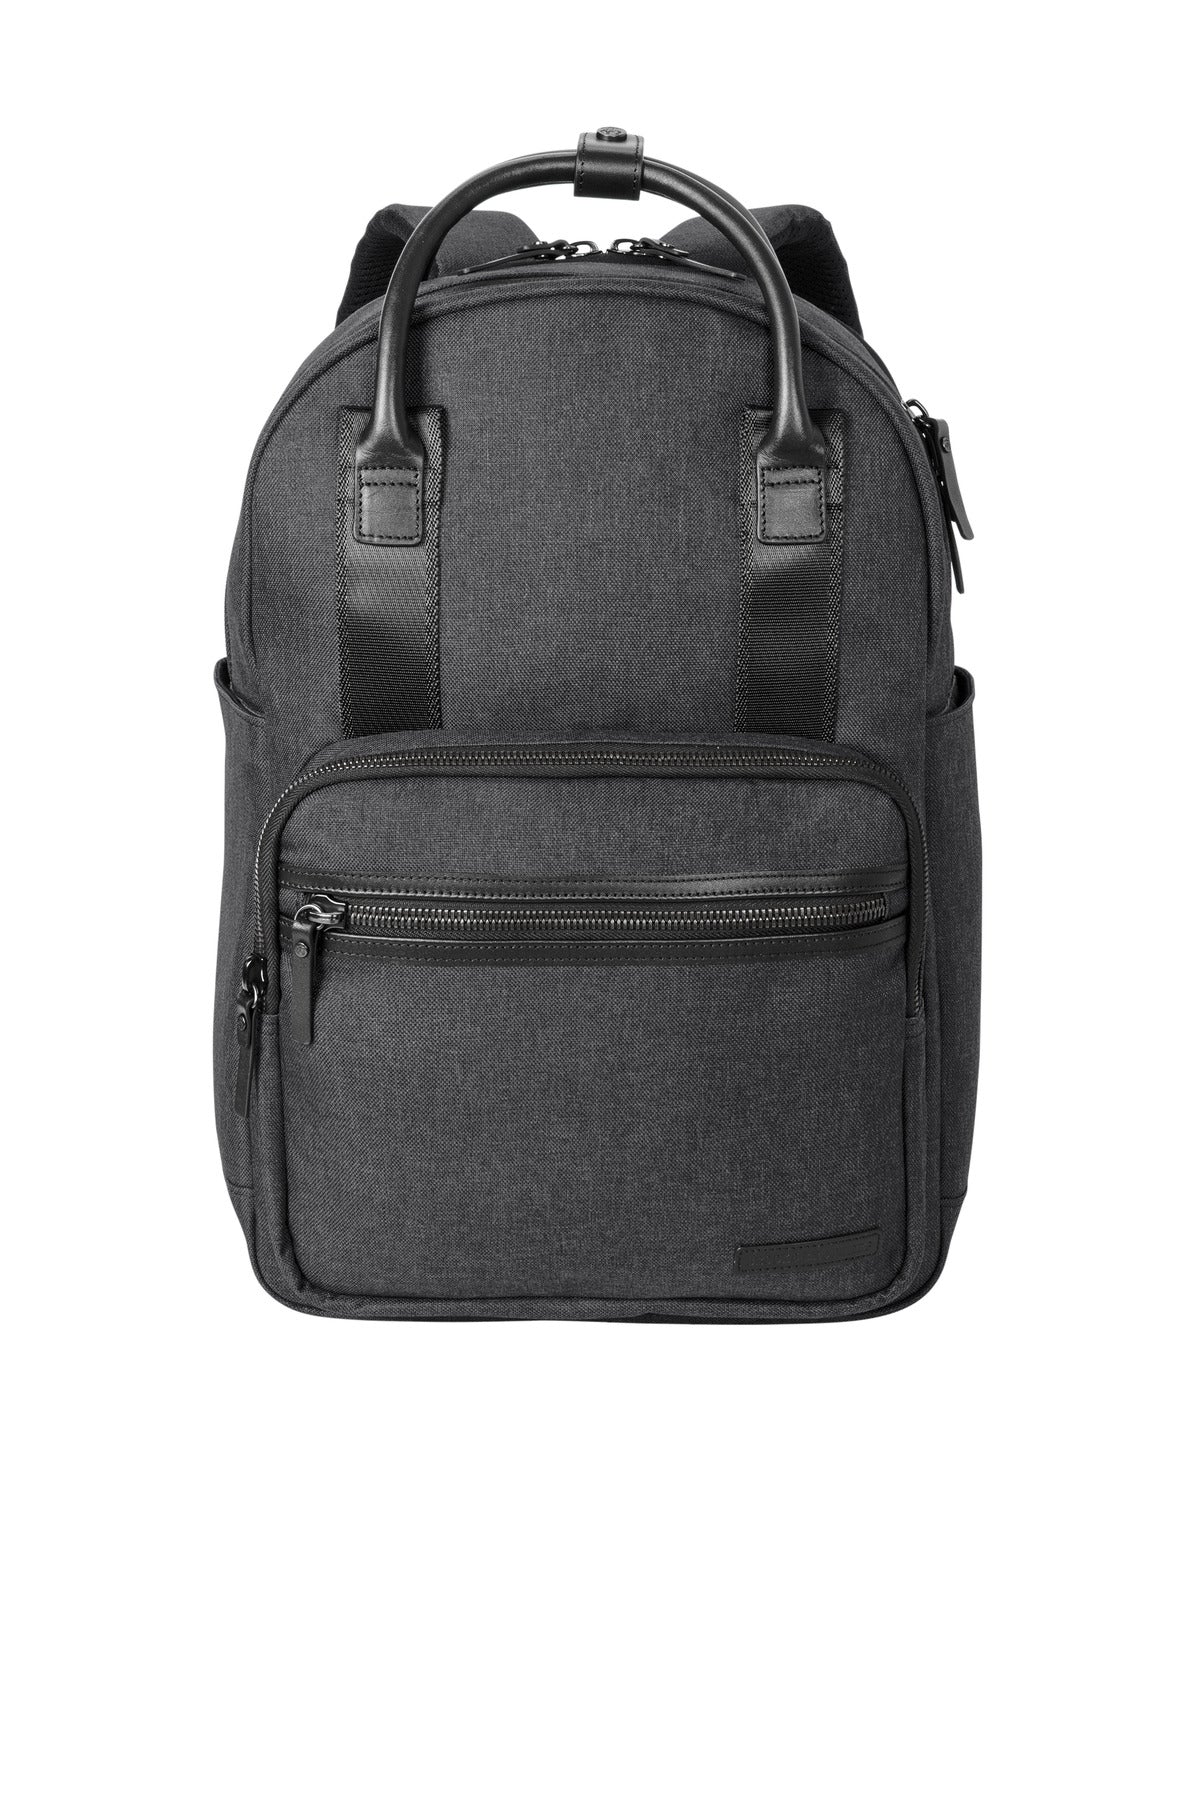 Brooks Brothers® Grant Dual-Handle Backpack BB18821 - DFW Impression